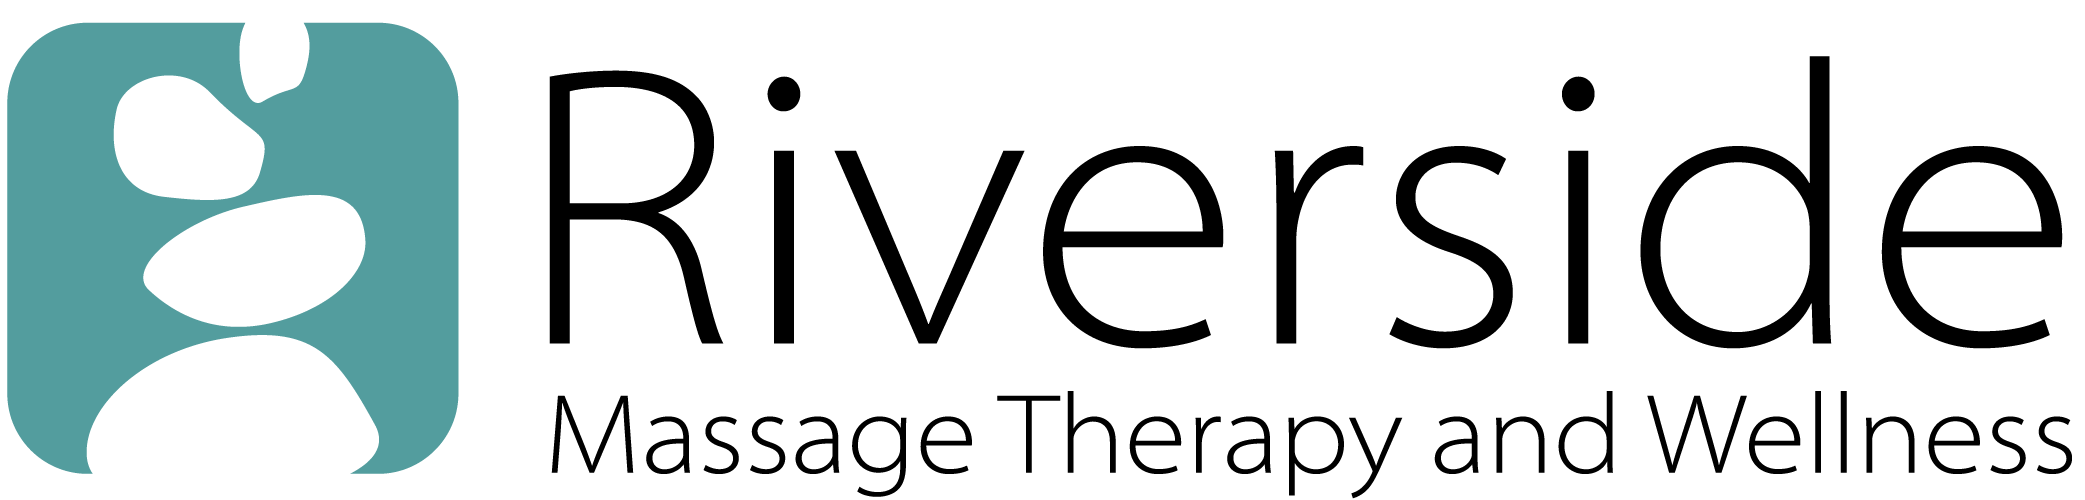 Riverside Massage Therapy and Wellness